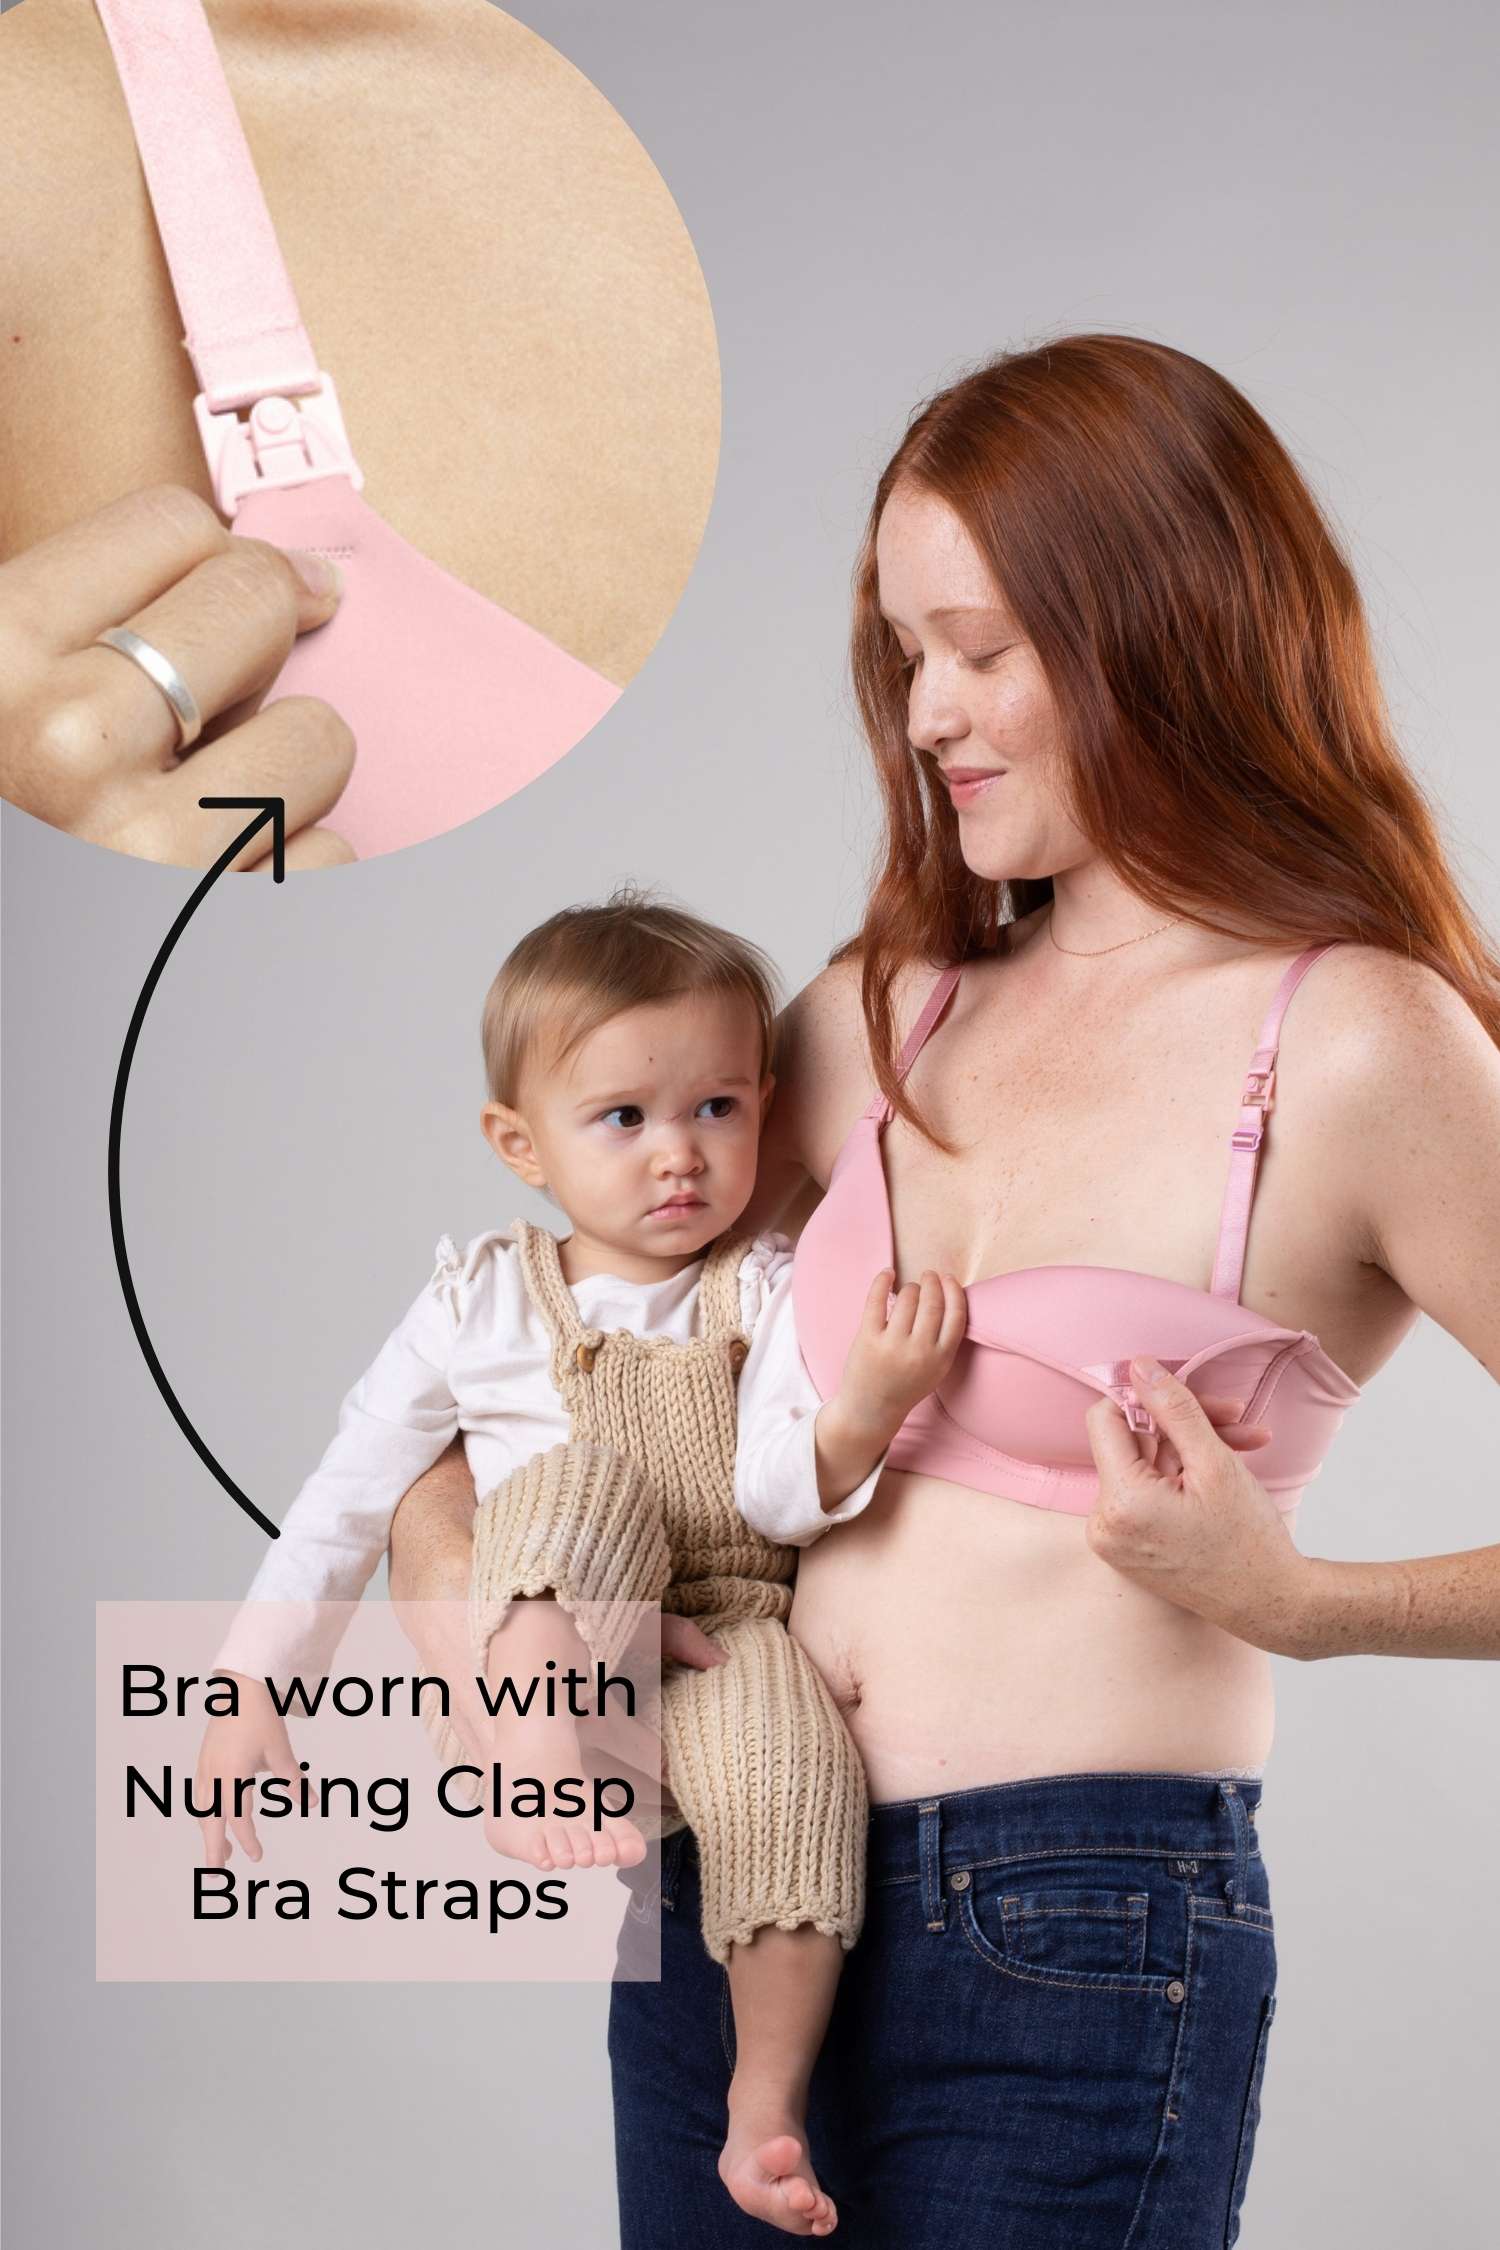 Undercover Nursing T-Shirt Bra in rose pink with one cup pulled down to show easy one hand function of nursing clasp for breastfeeding. Also close up view of nursing clasp.